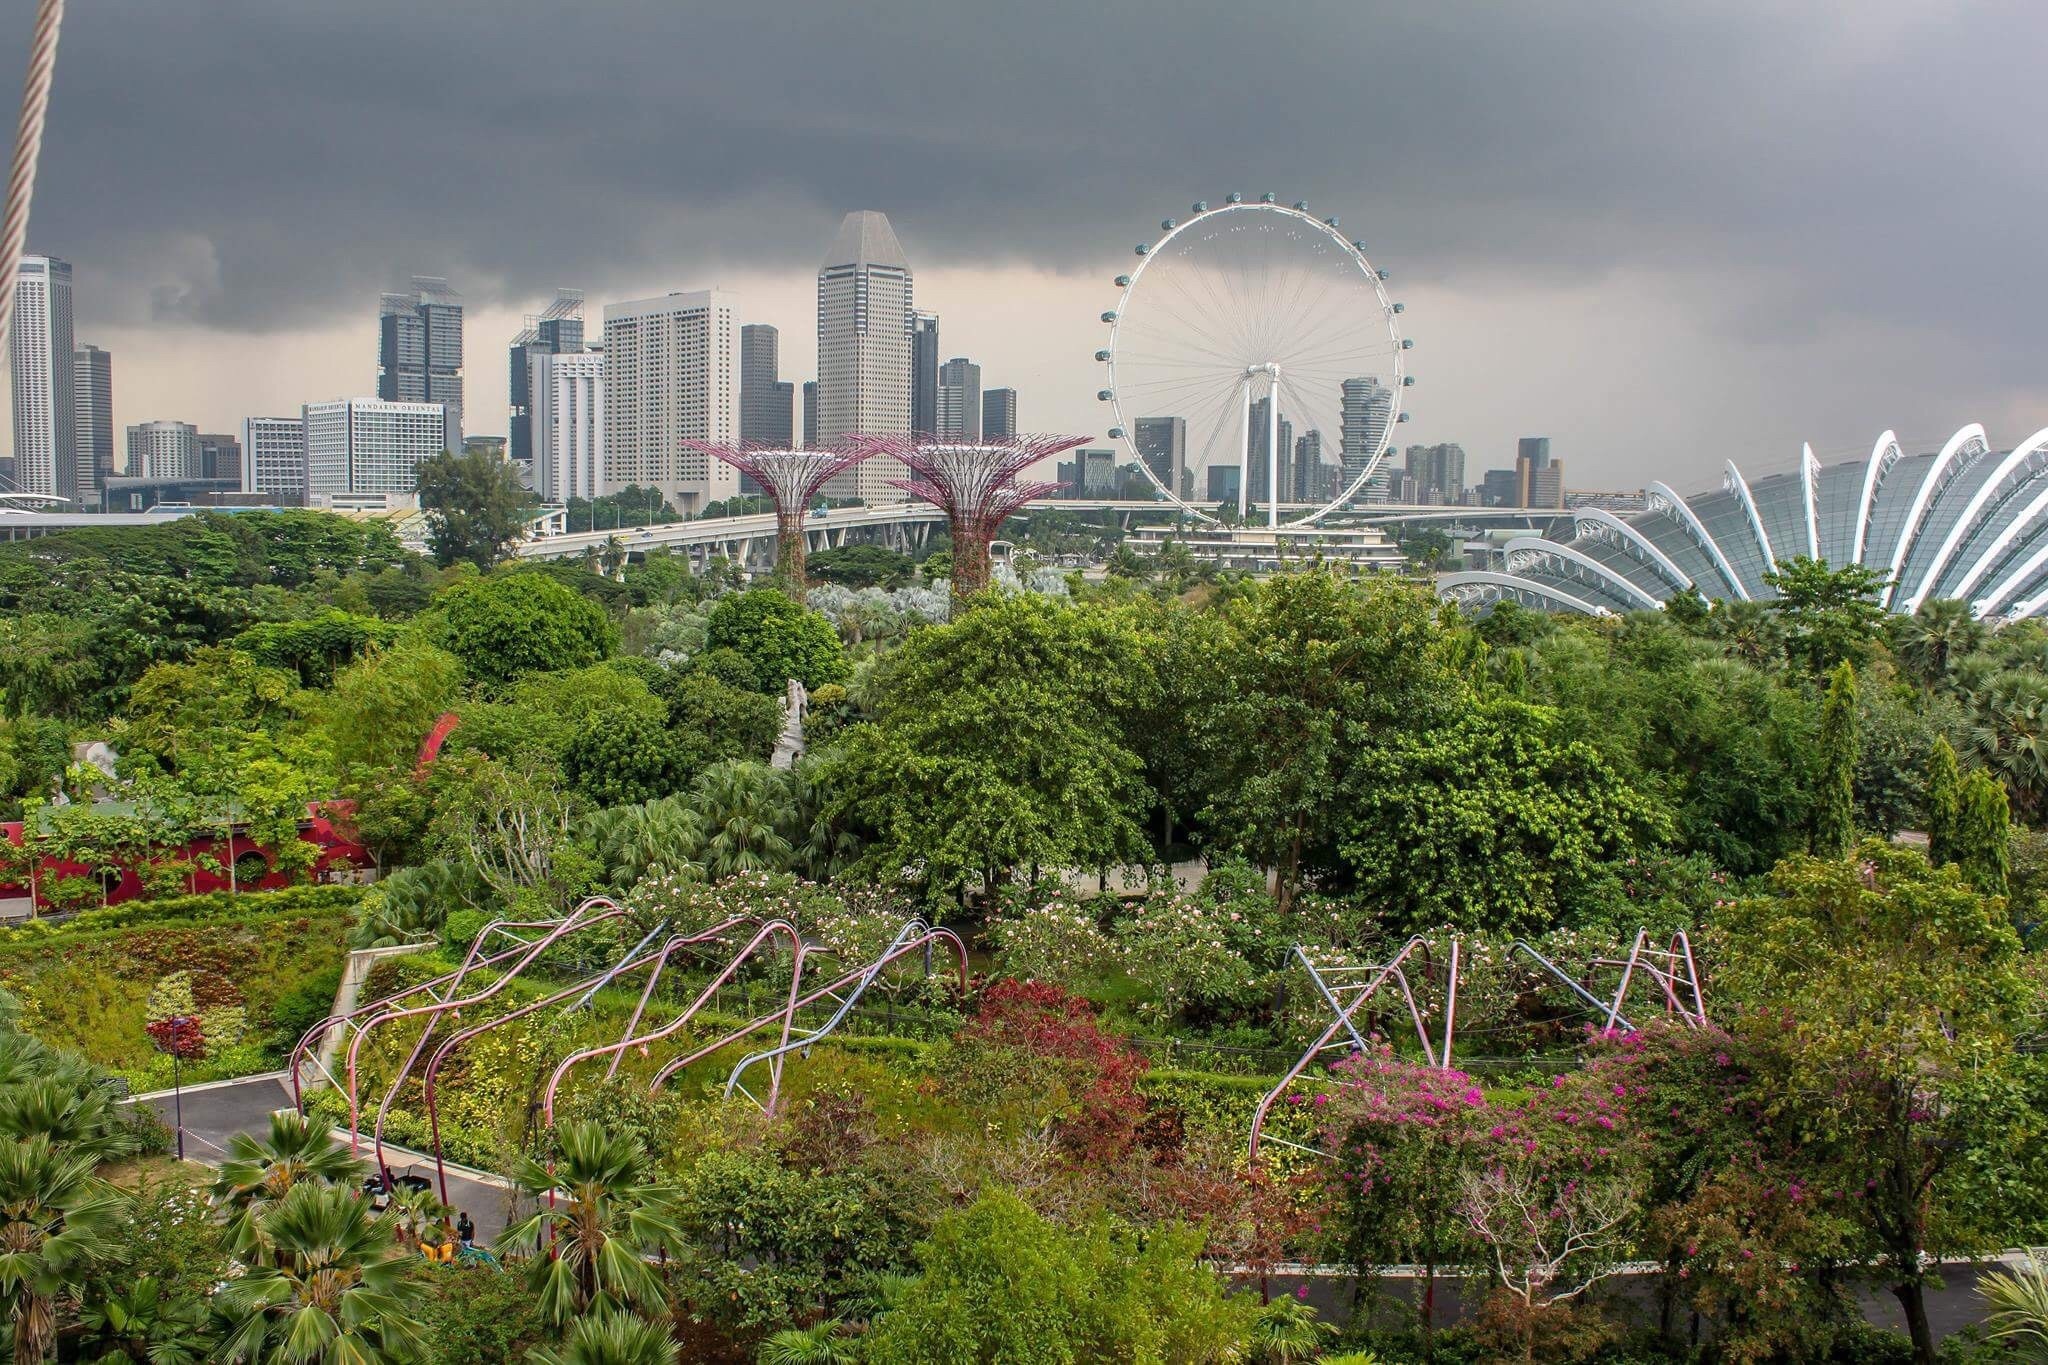 The beautiful view from the OCBC Skyway, which allows you to walk high up among the Supergrove trees. #singapore 